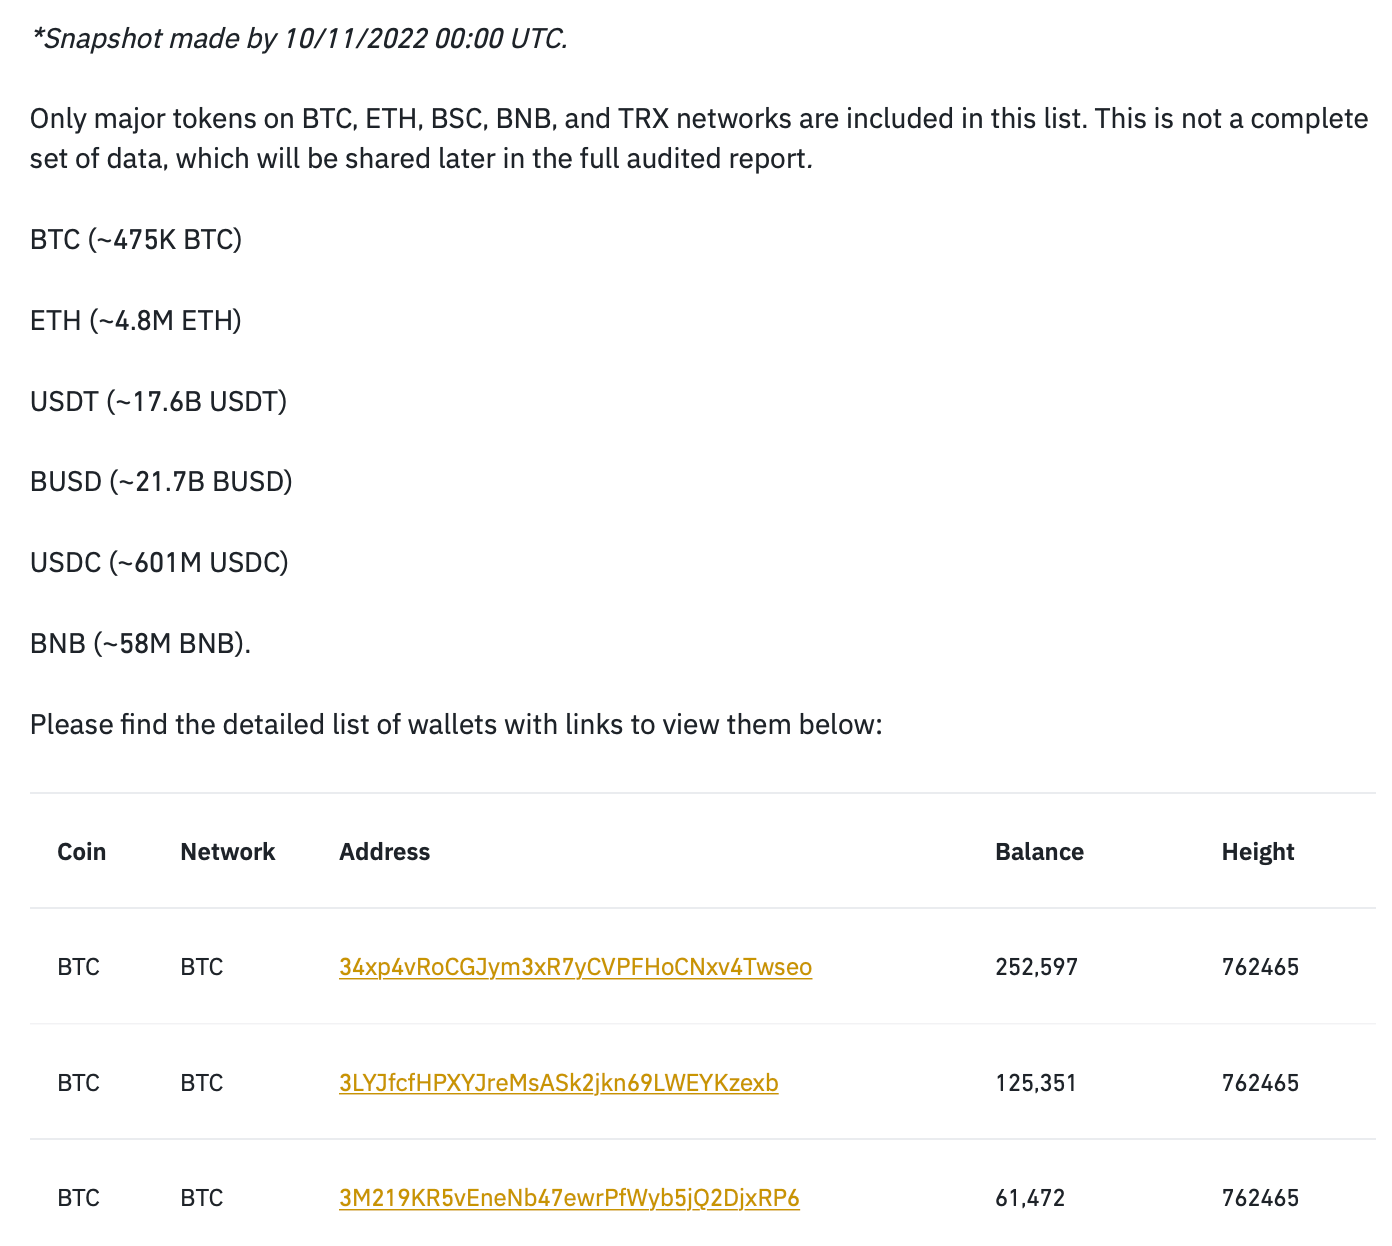 Evidence of Binance reserves (unverified as of November 16, 2022)